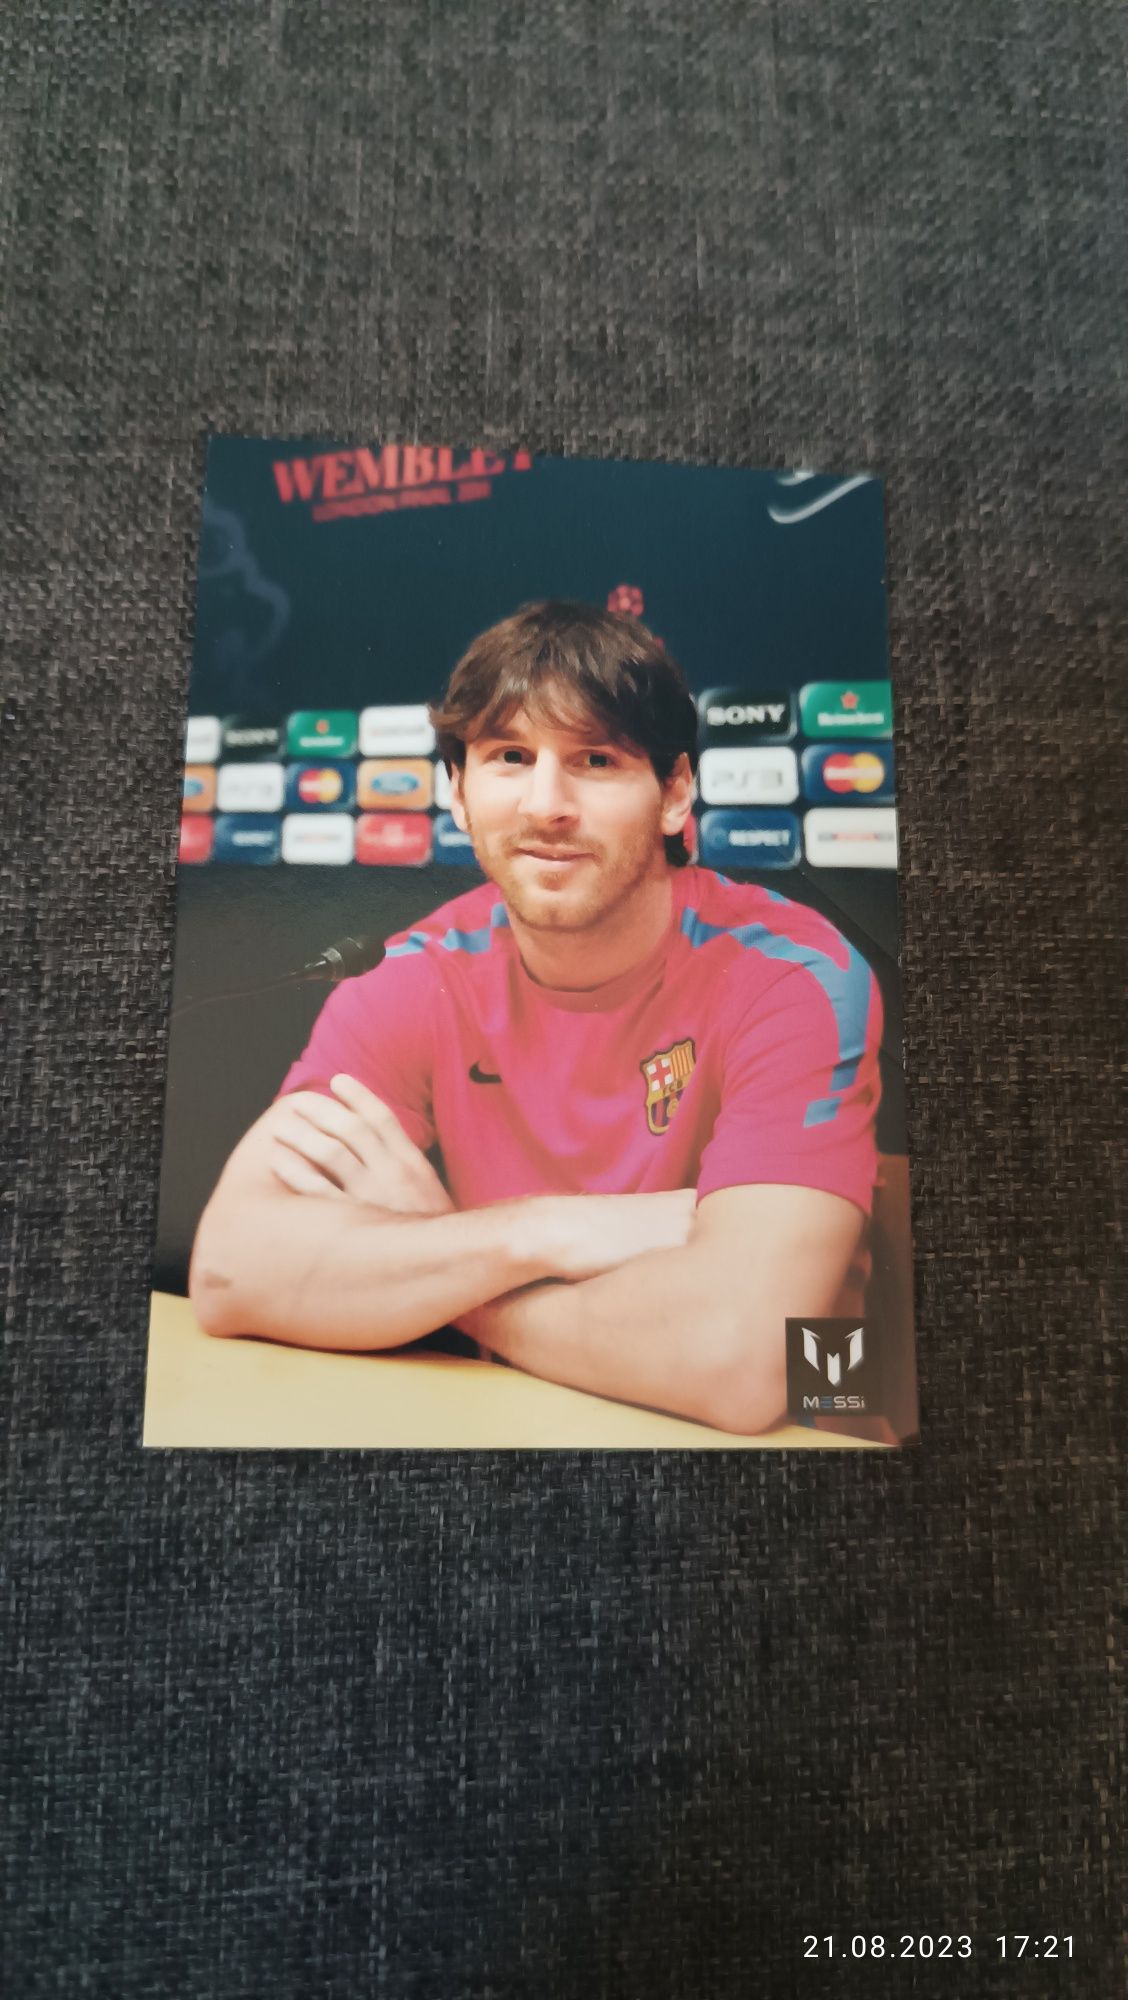 Karta official Messi card collection # 60